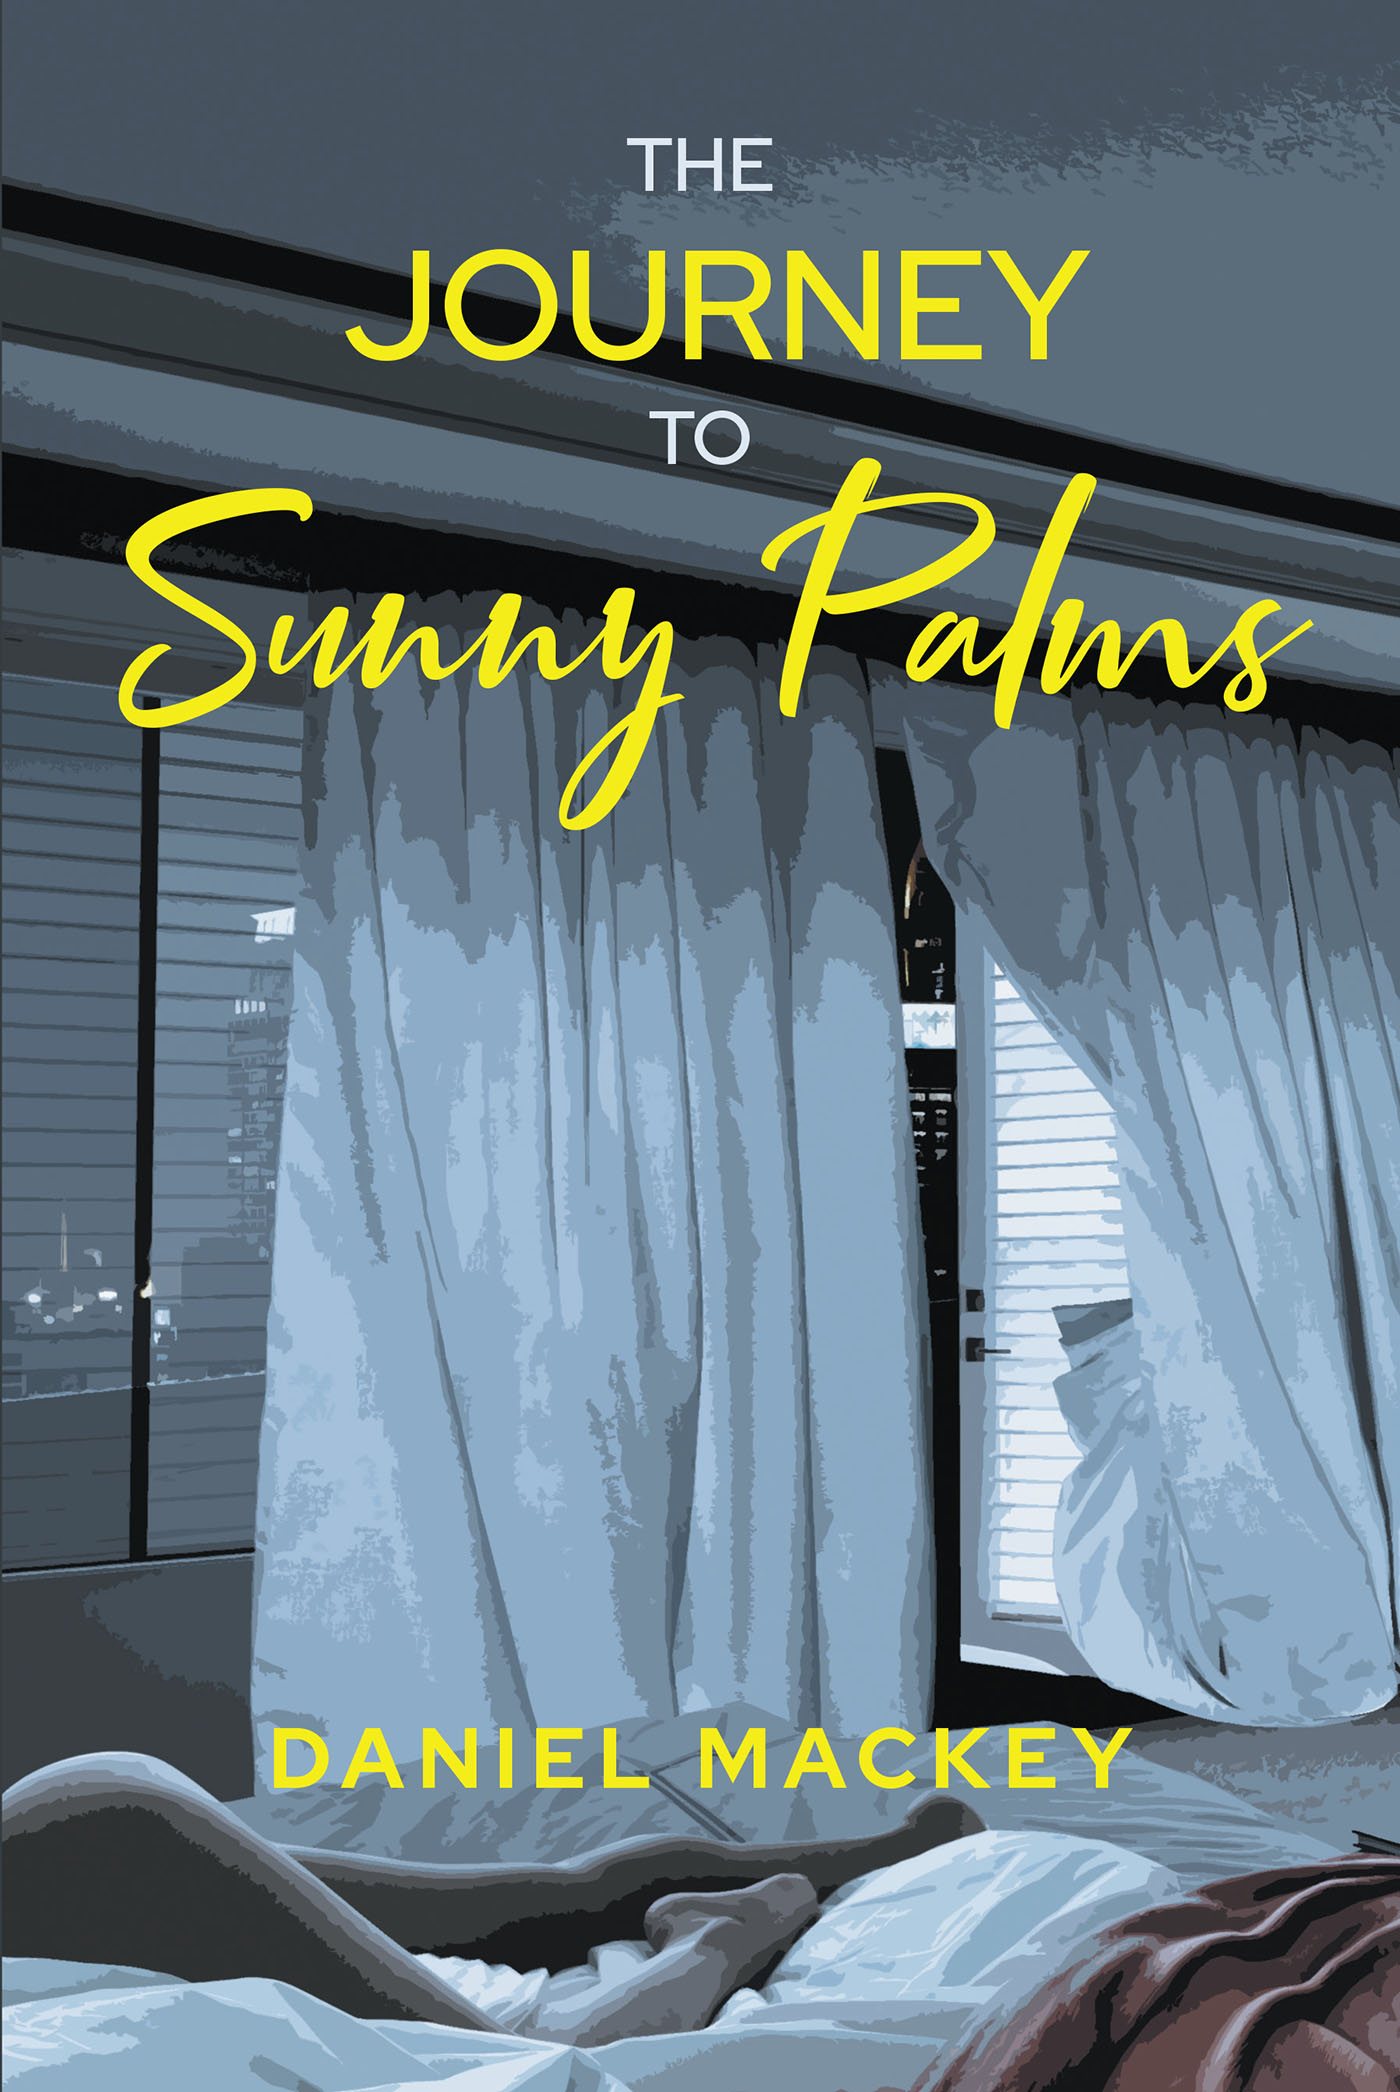 Daniel Mackey’s New Book, "The Journey to Sunny Palms," is a Passionate and Fun Homage to the Thrill of First Love and the Extraordinary Bond Between Same-Sex Couples